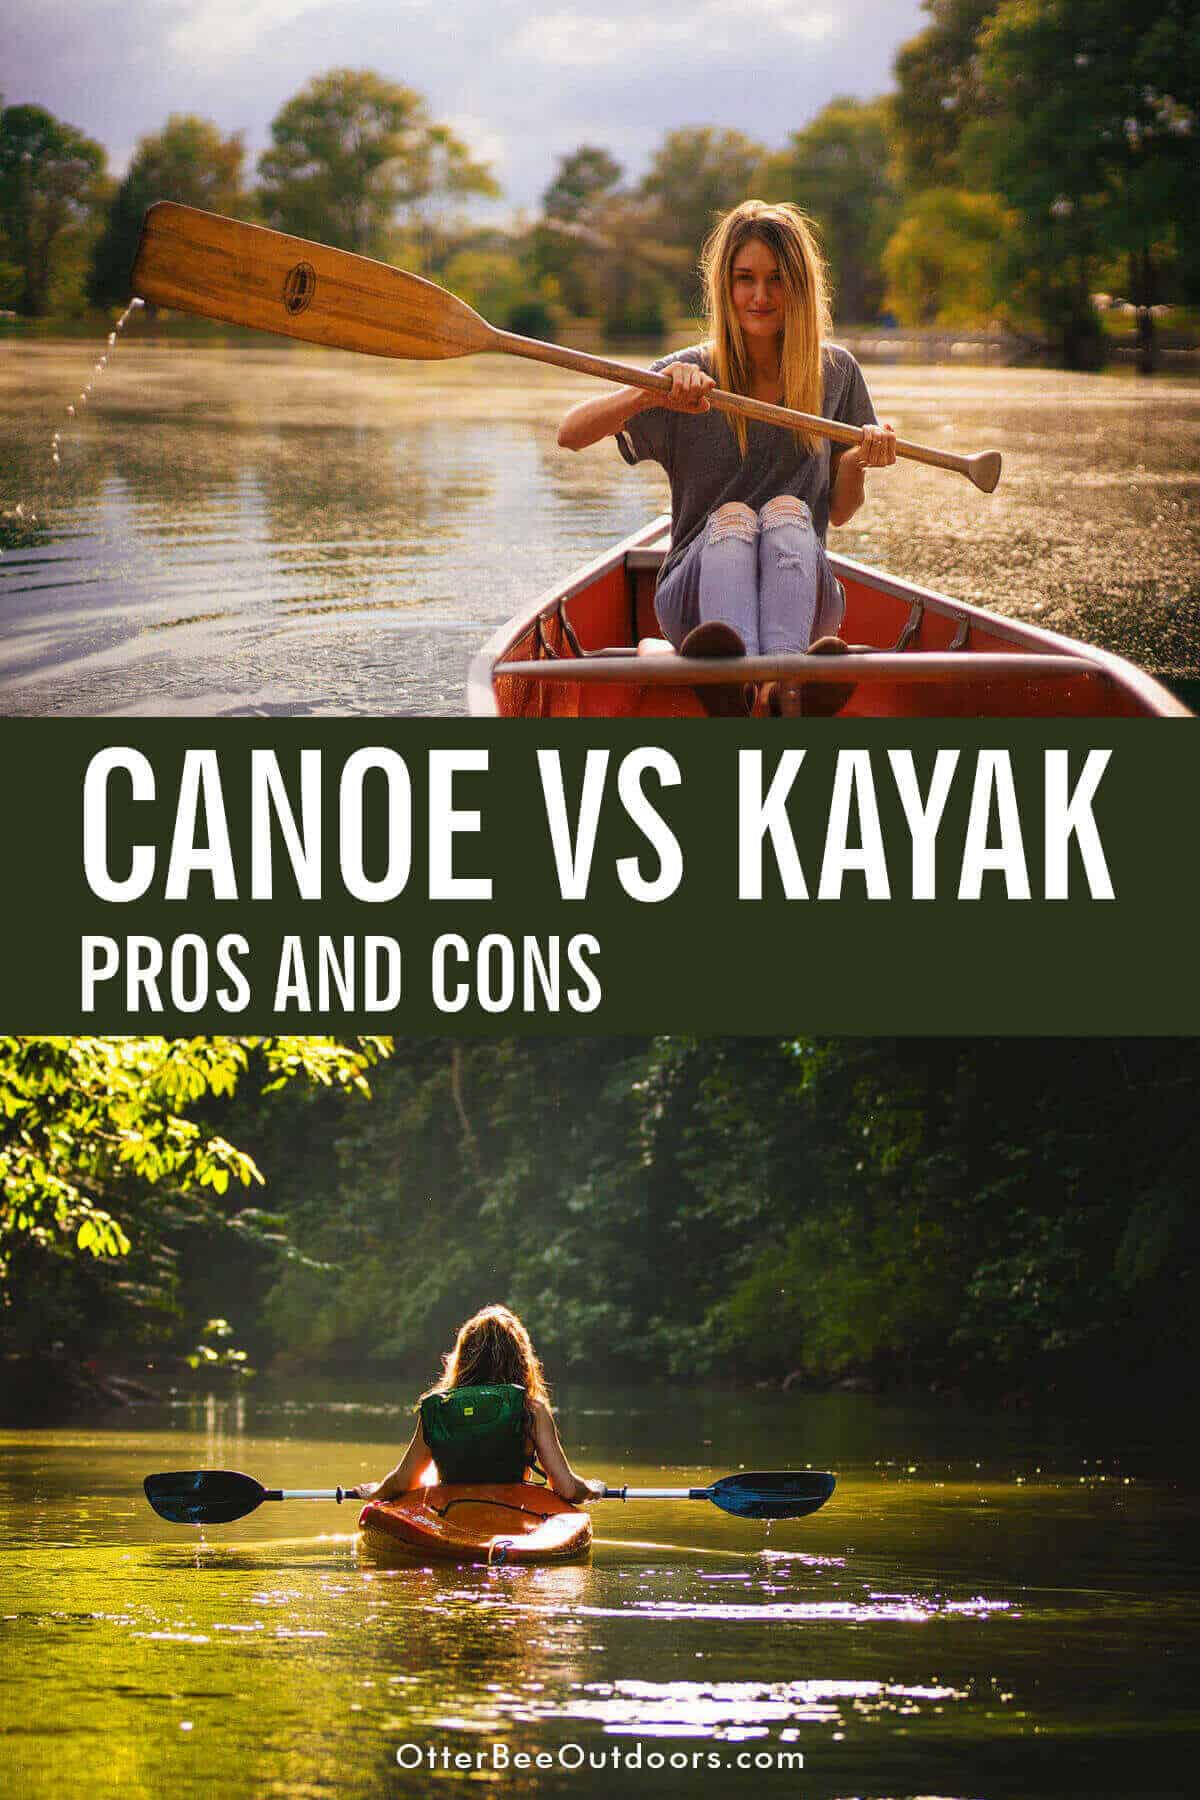 Canoes vs kayaks. Which is better? Let's explore the pros and cons of each boat so you'll know which to use on your next paddling adventure.